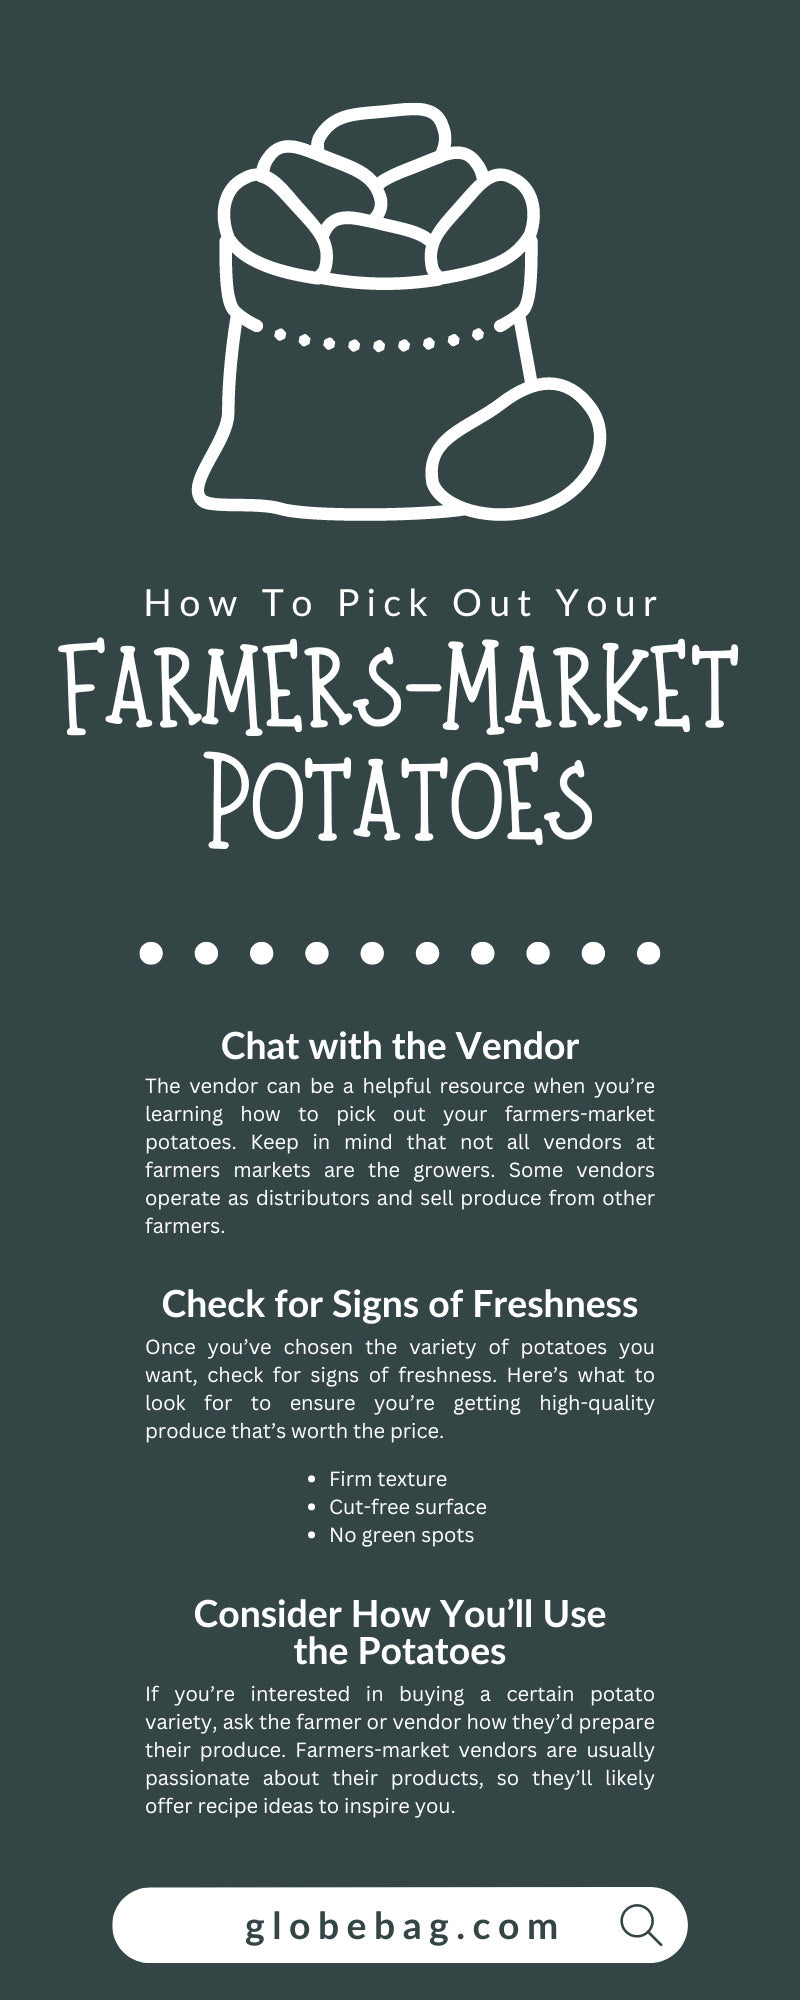 How To Pick Out Your Farmers-Market Potatoes